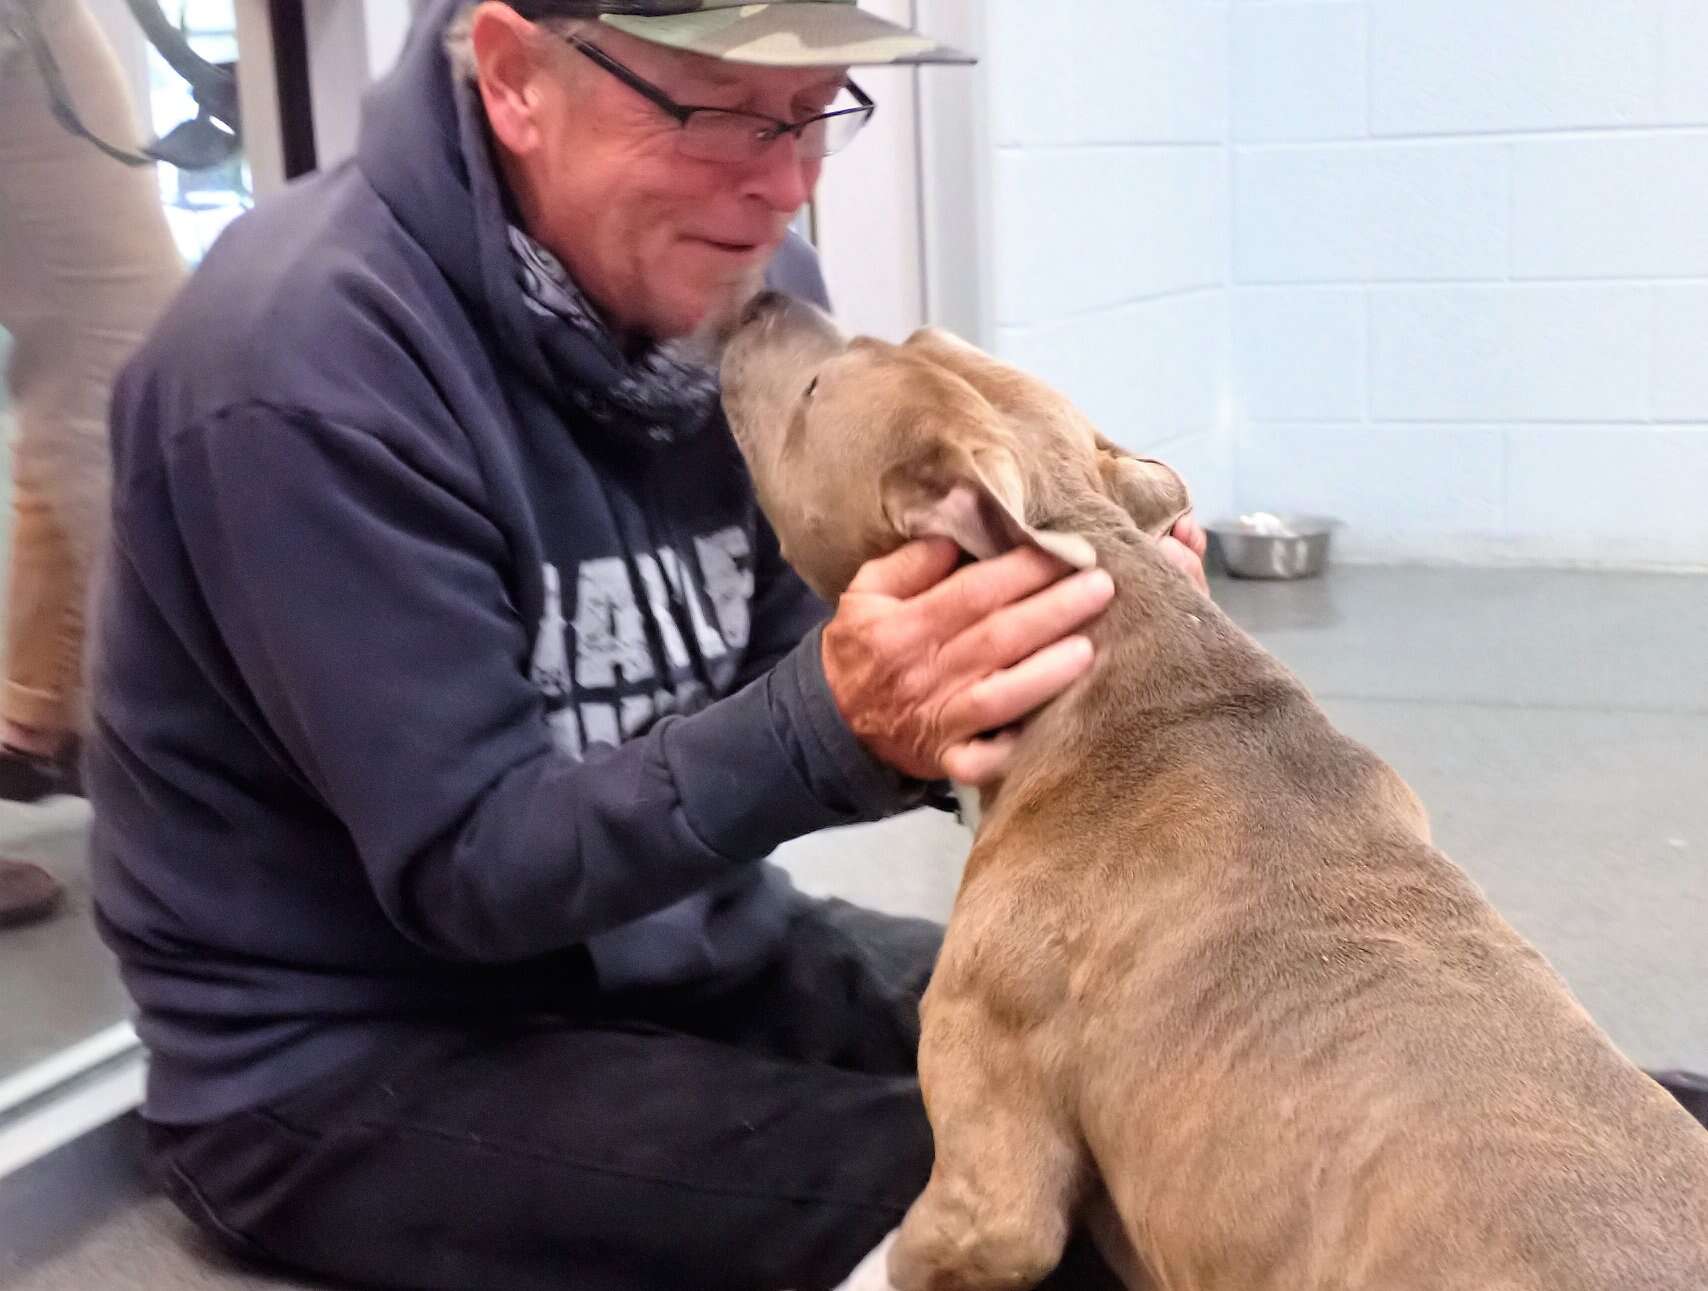 Dog reunites with his owner after six months apart